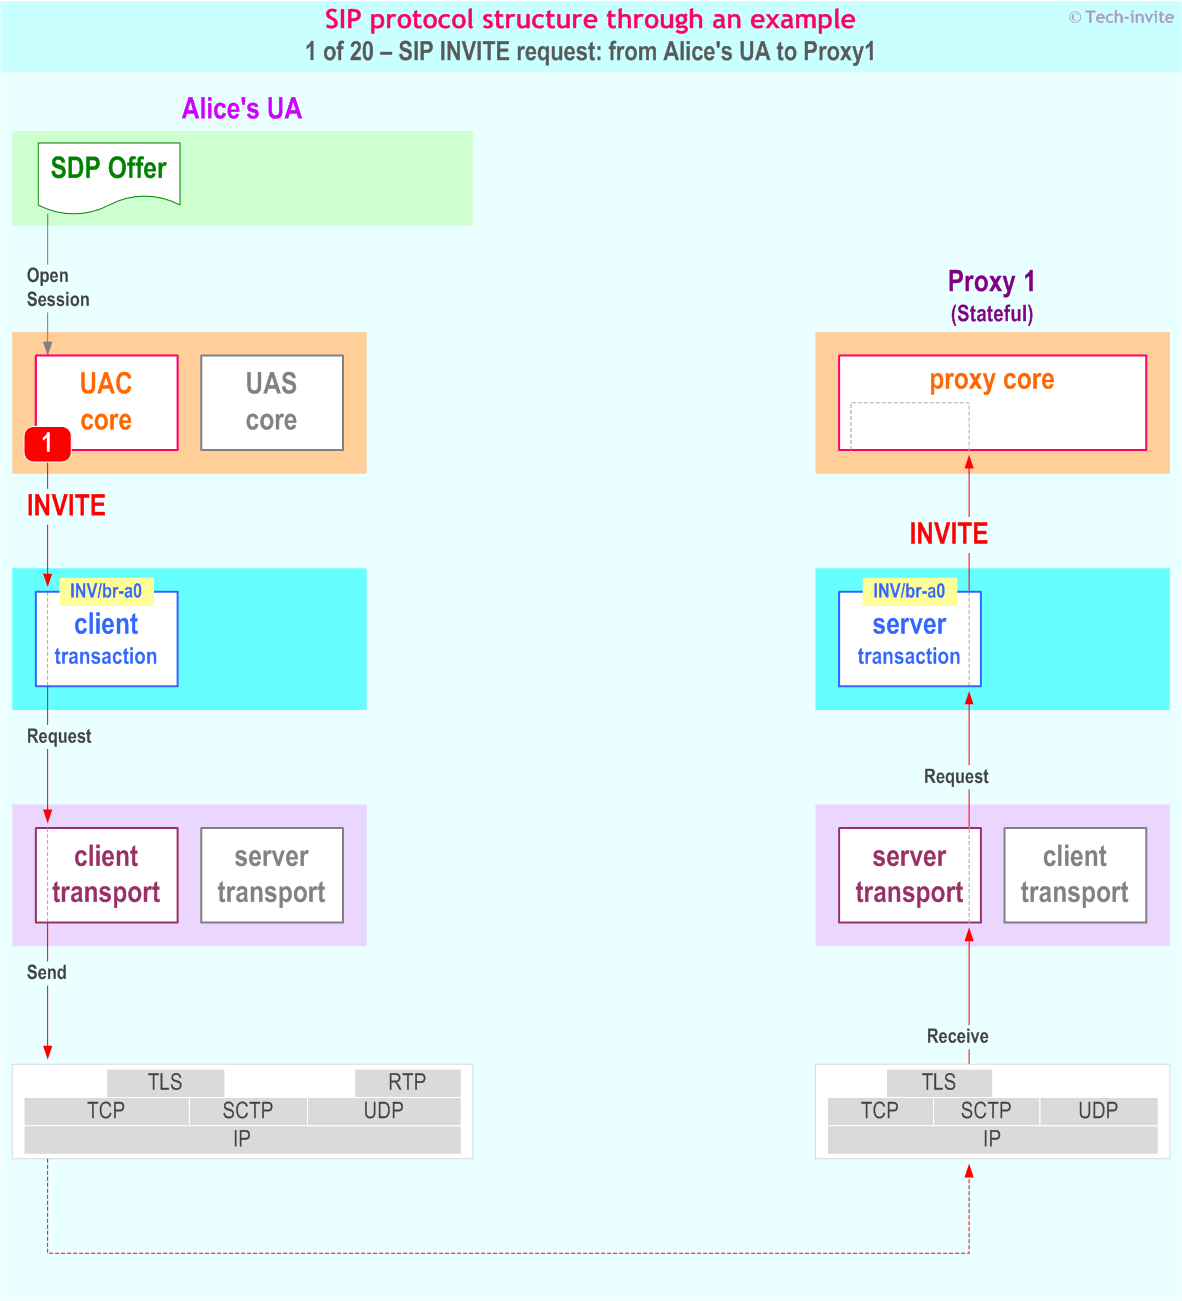 SIP protocol structure through an example: SIP INVITE request from Alice's UA to Proxy1